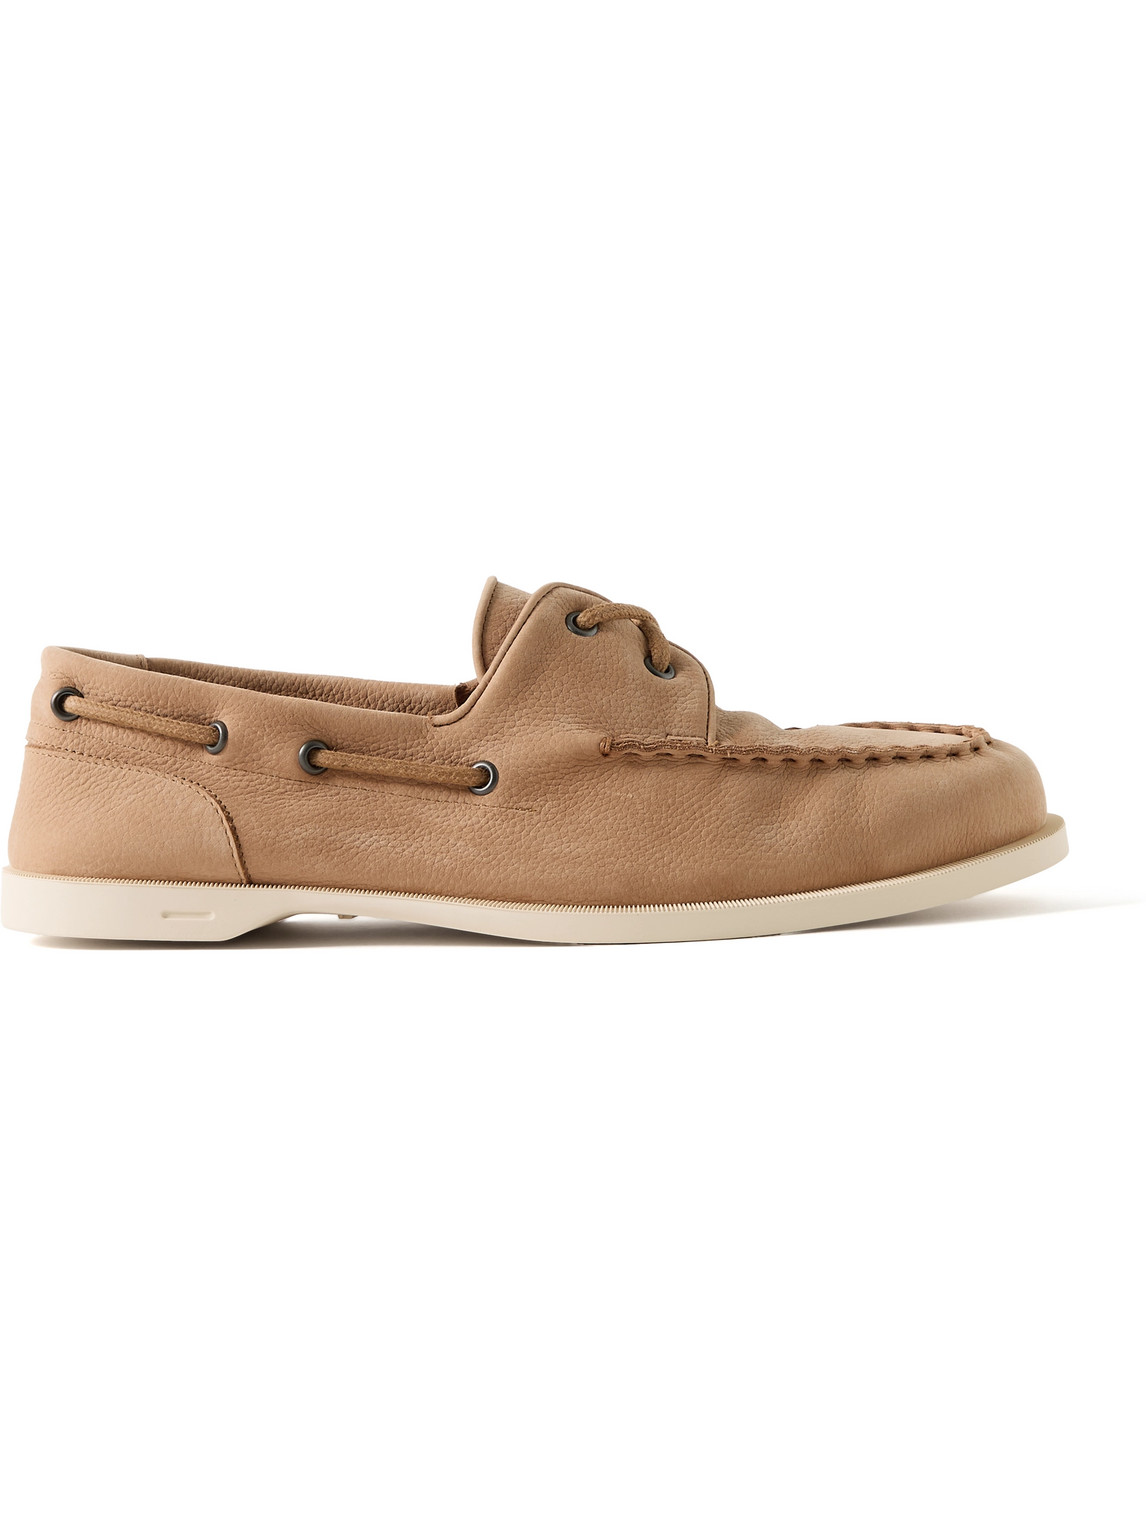 John Lobb Foil Leather Boat Shoes In Brown